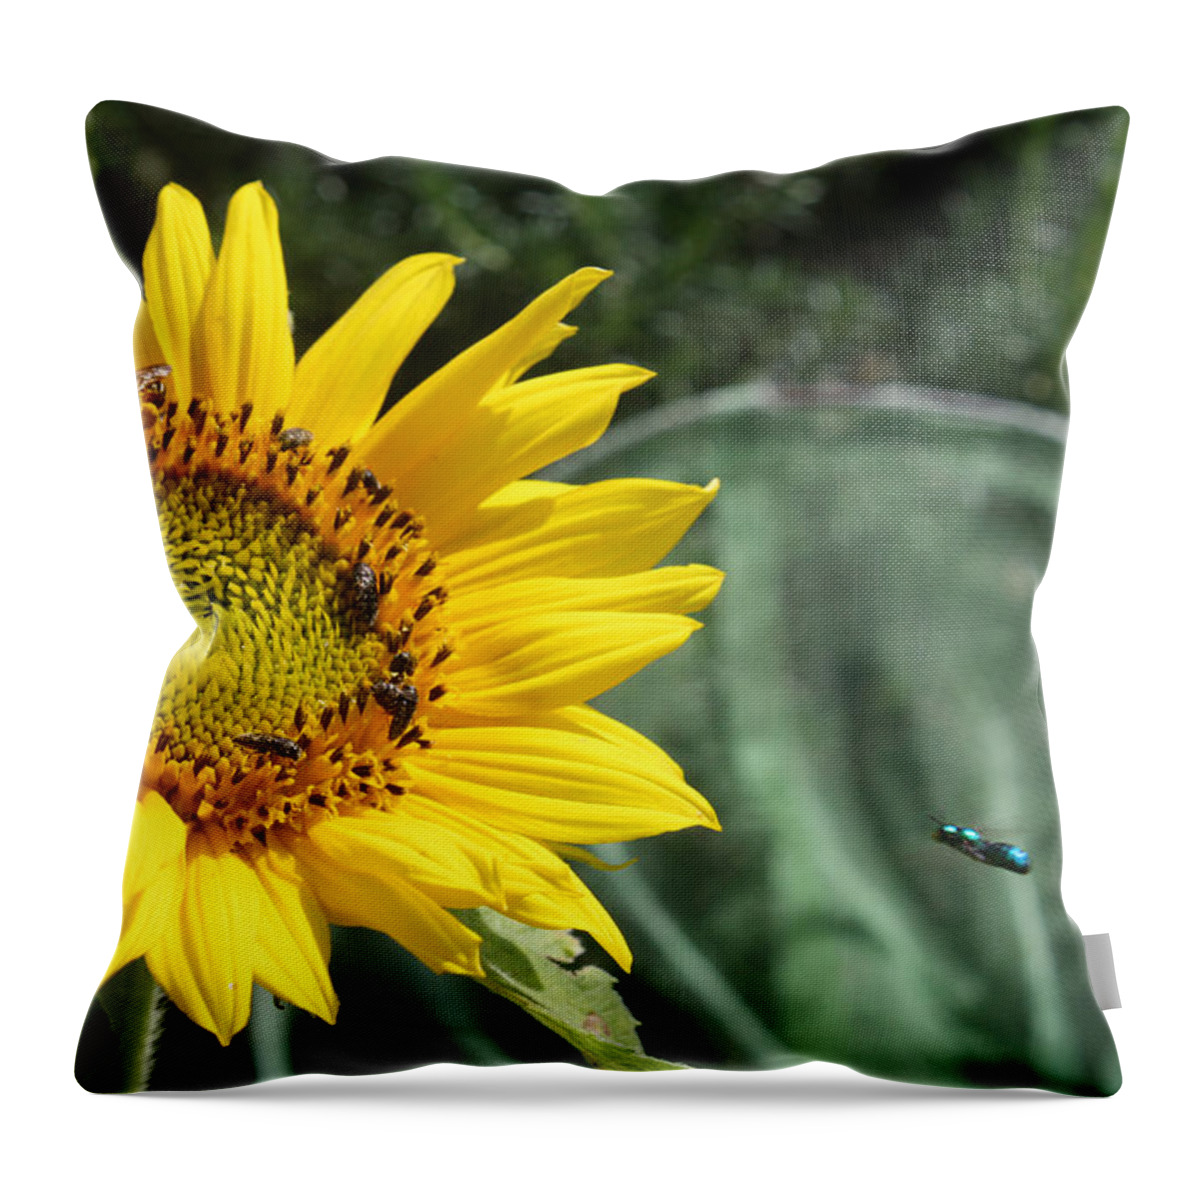 Sunflower Throw Pillow featuring the photograph Skipping Spring by Ismael Cavazos